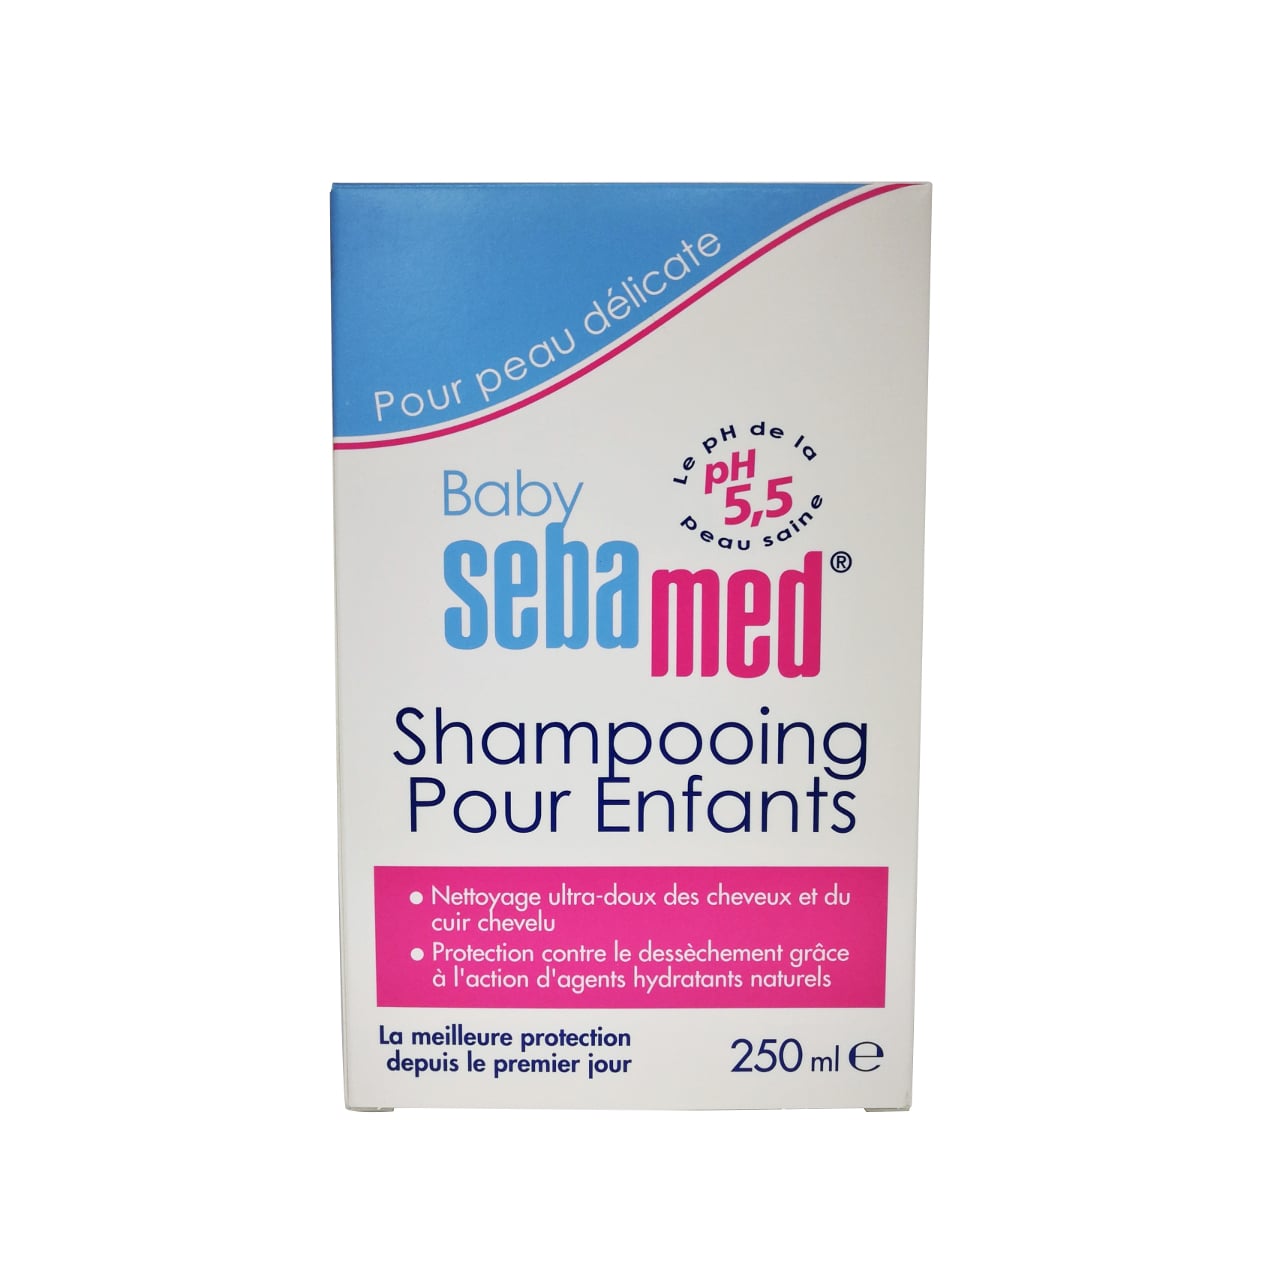 Product label for Baby Sebamed Children's Shampoo 250 mL in French